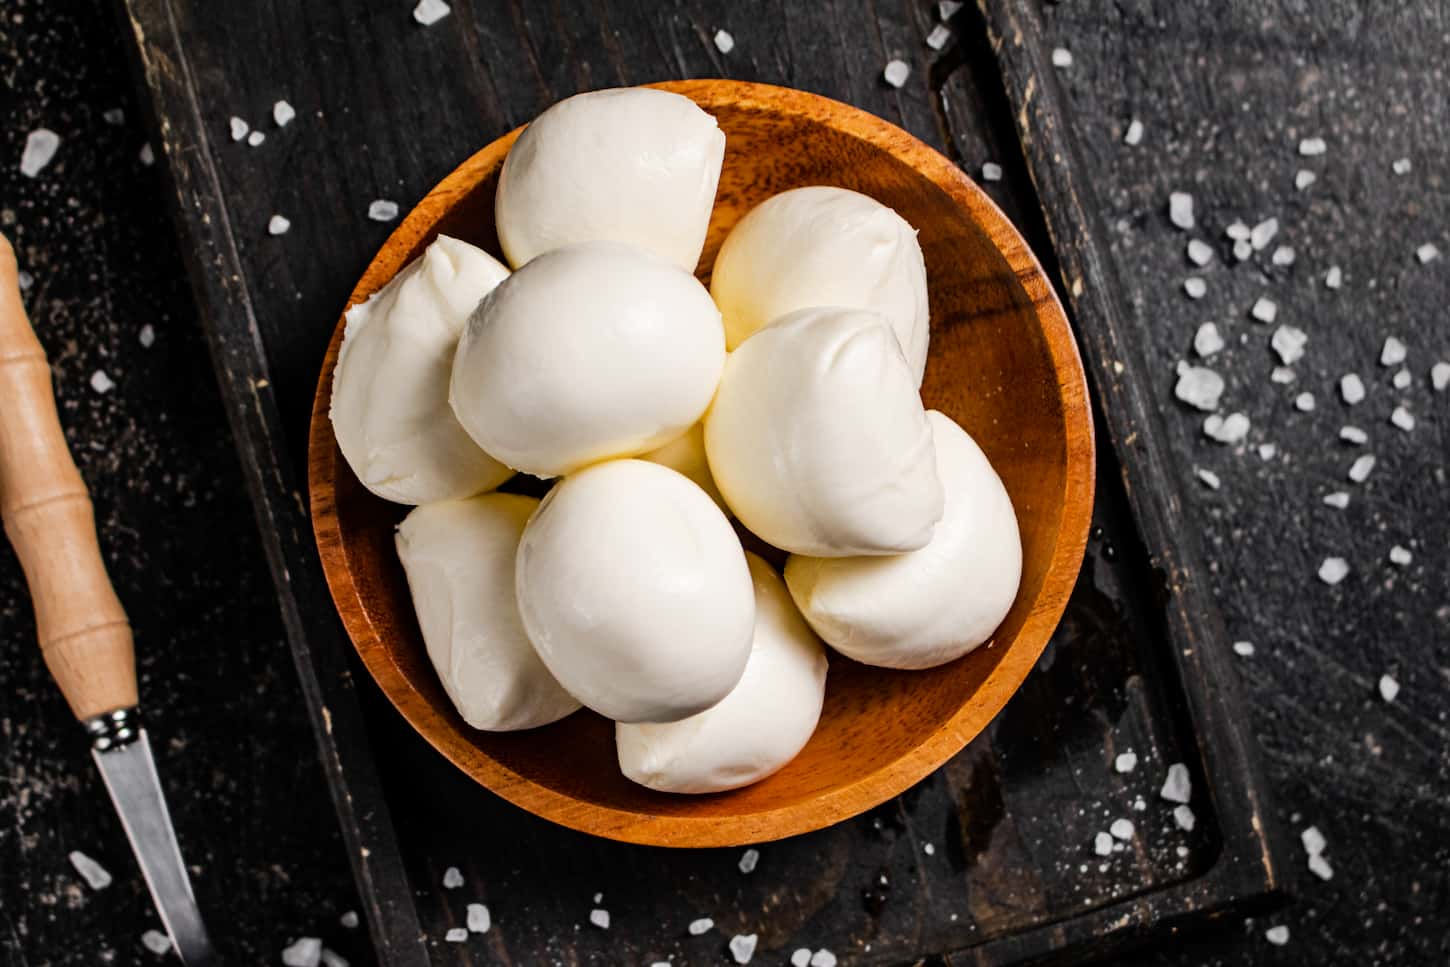 An image of mozzarella cheese on a cutting board with salt scattered on black table background.